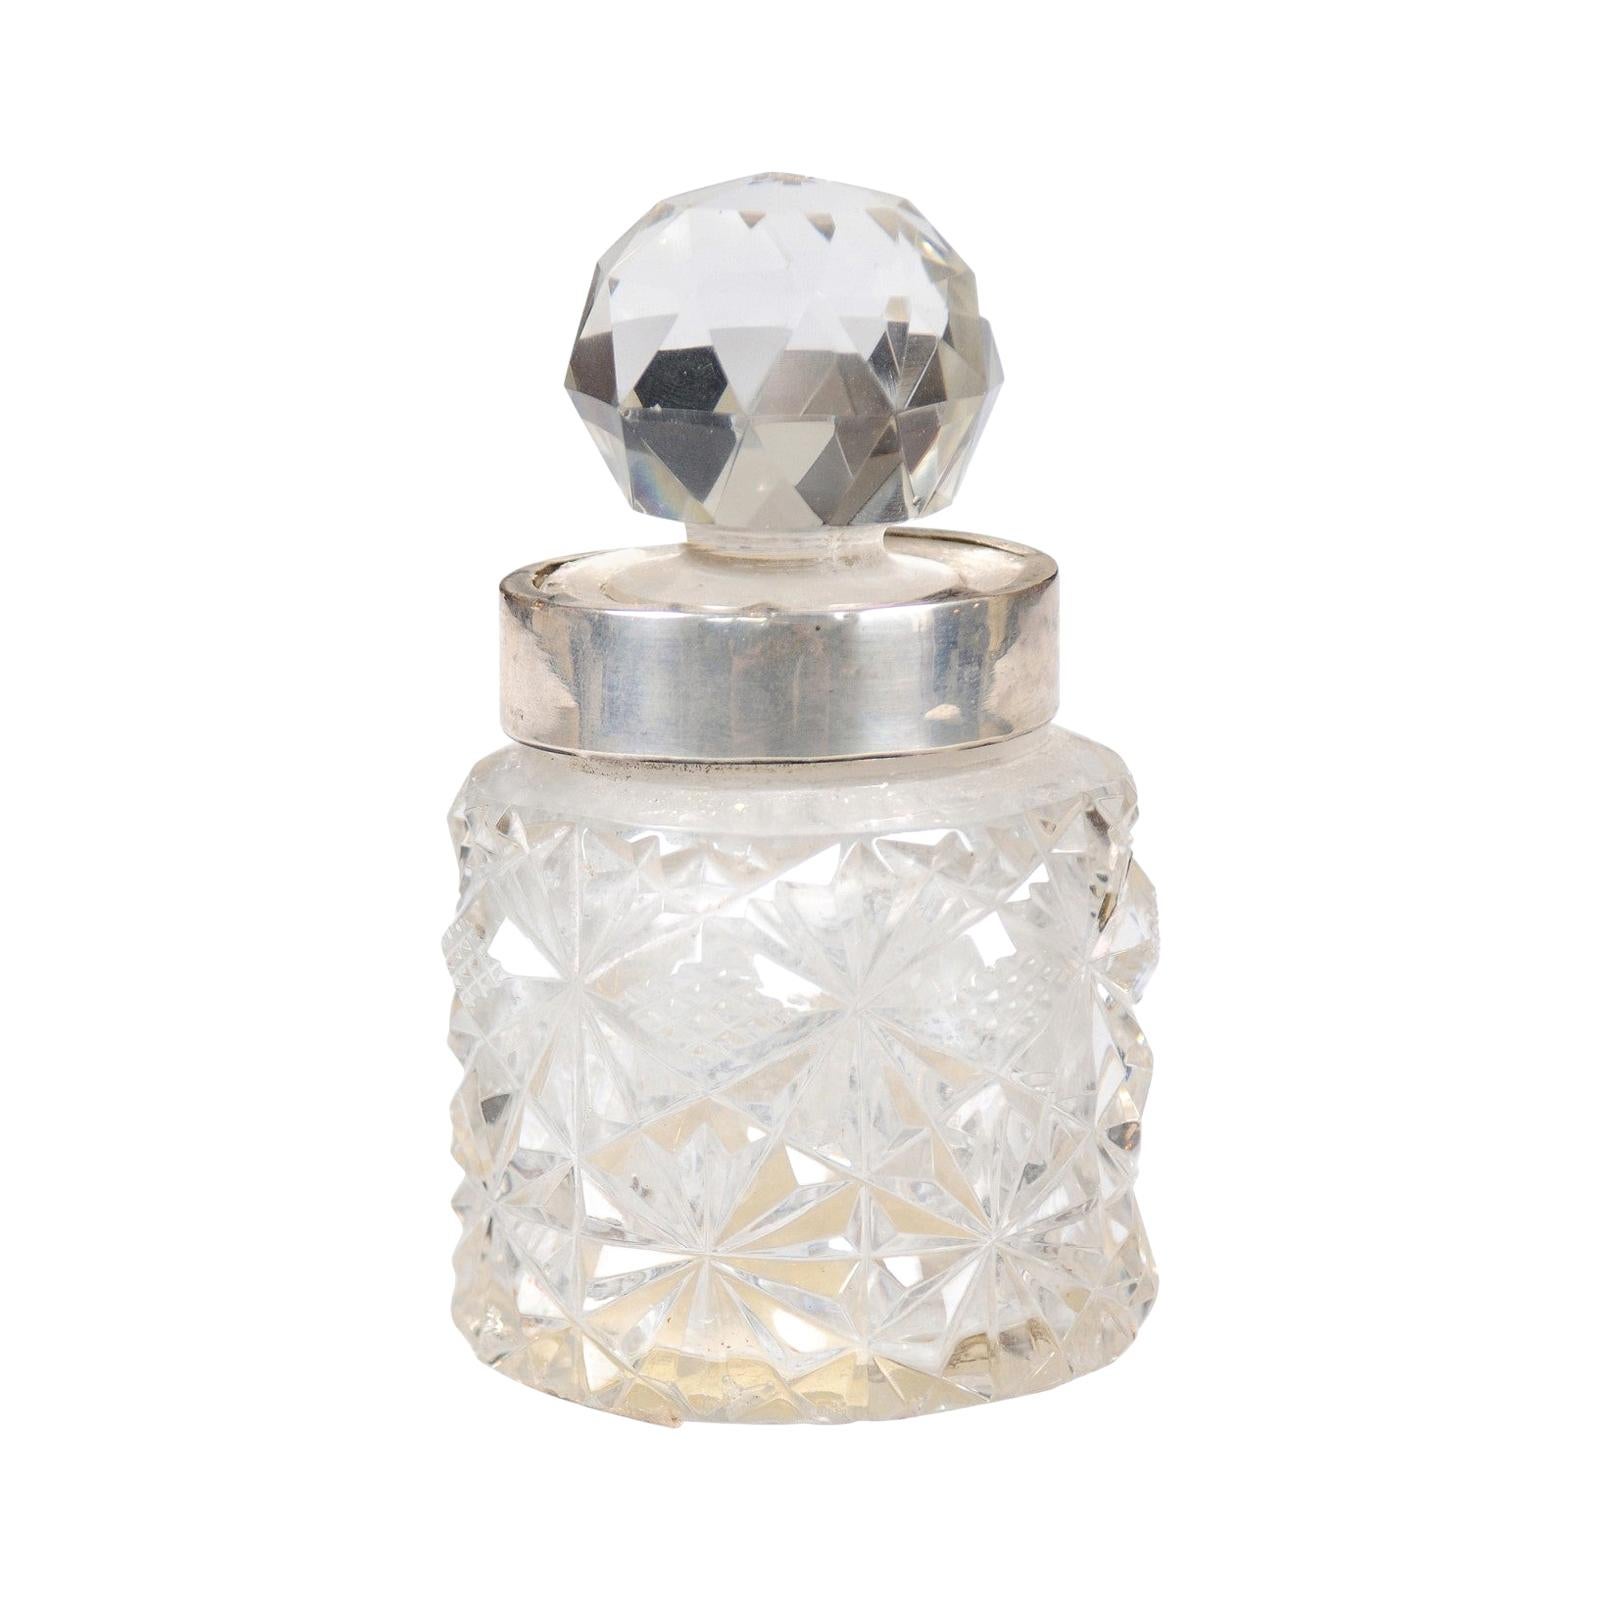 English 19th Century Crystal and Silver Jug with Diamond Motifs and Ball Stopper